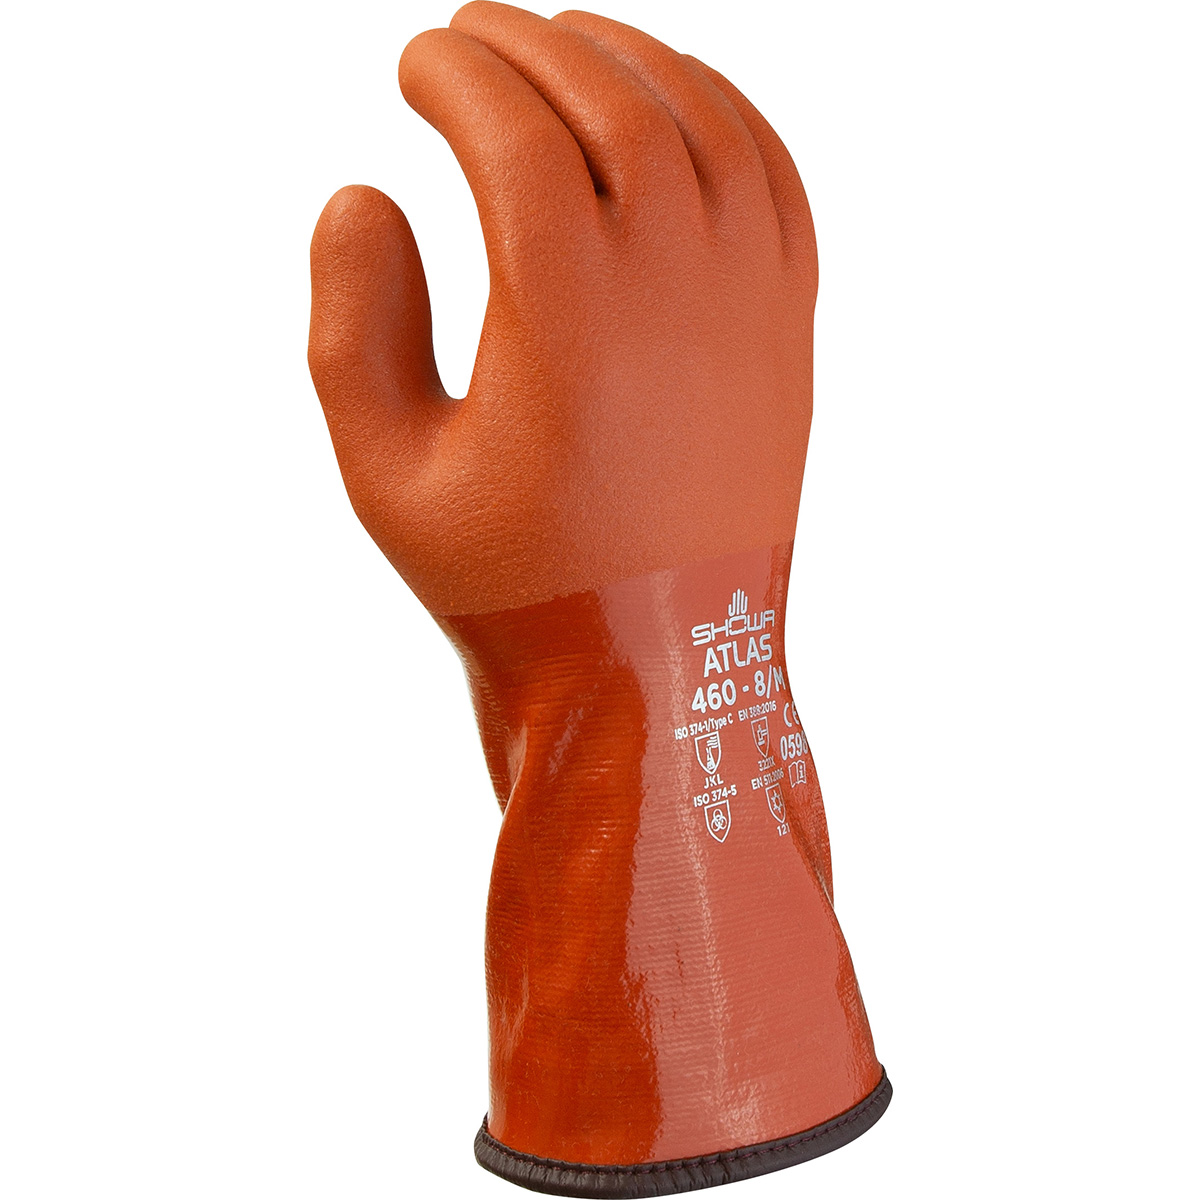 Chemical resistant PVC fully coated double dipped, insulated with seamless acrylic liner, orange, rough finish, large